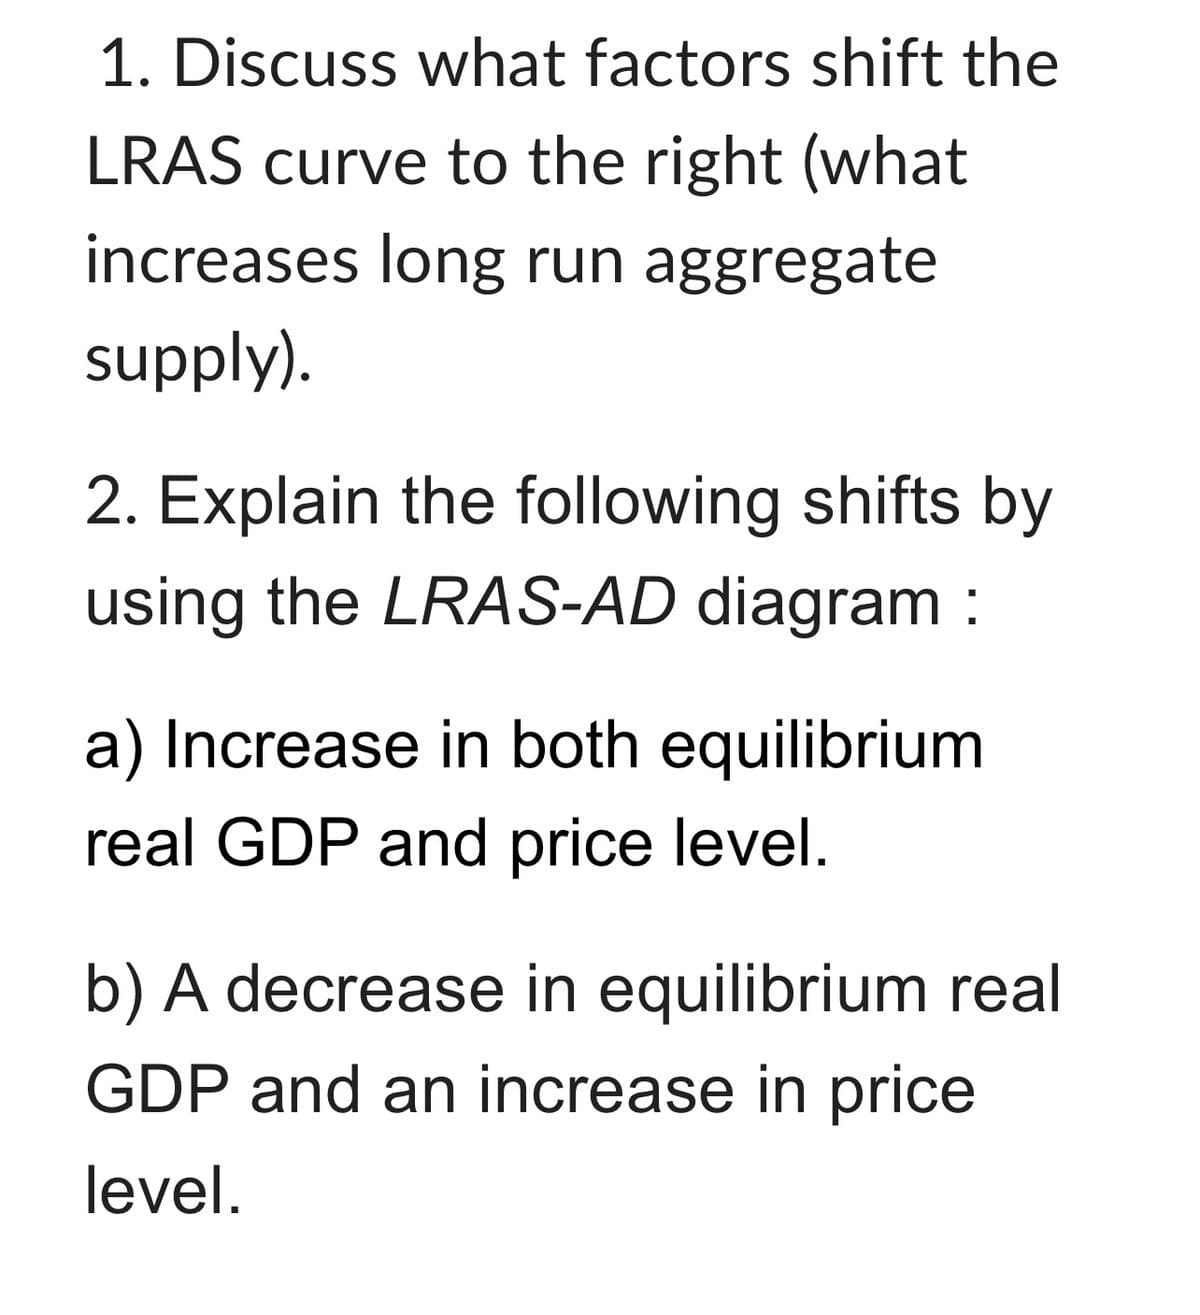 1. Discuss what factors shift the
LRAS curve to the right (what
increases long run aggregate
supply).
2. Explain the following shifts by
using the LRAS-AD diagram :
a) Increase in both equilibrium
real GDP and price level.
b) A decrease in equilibrium real
GDP and an increase in price
level.